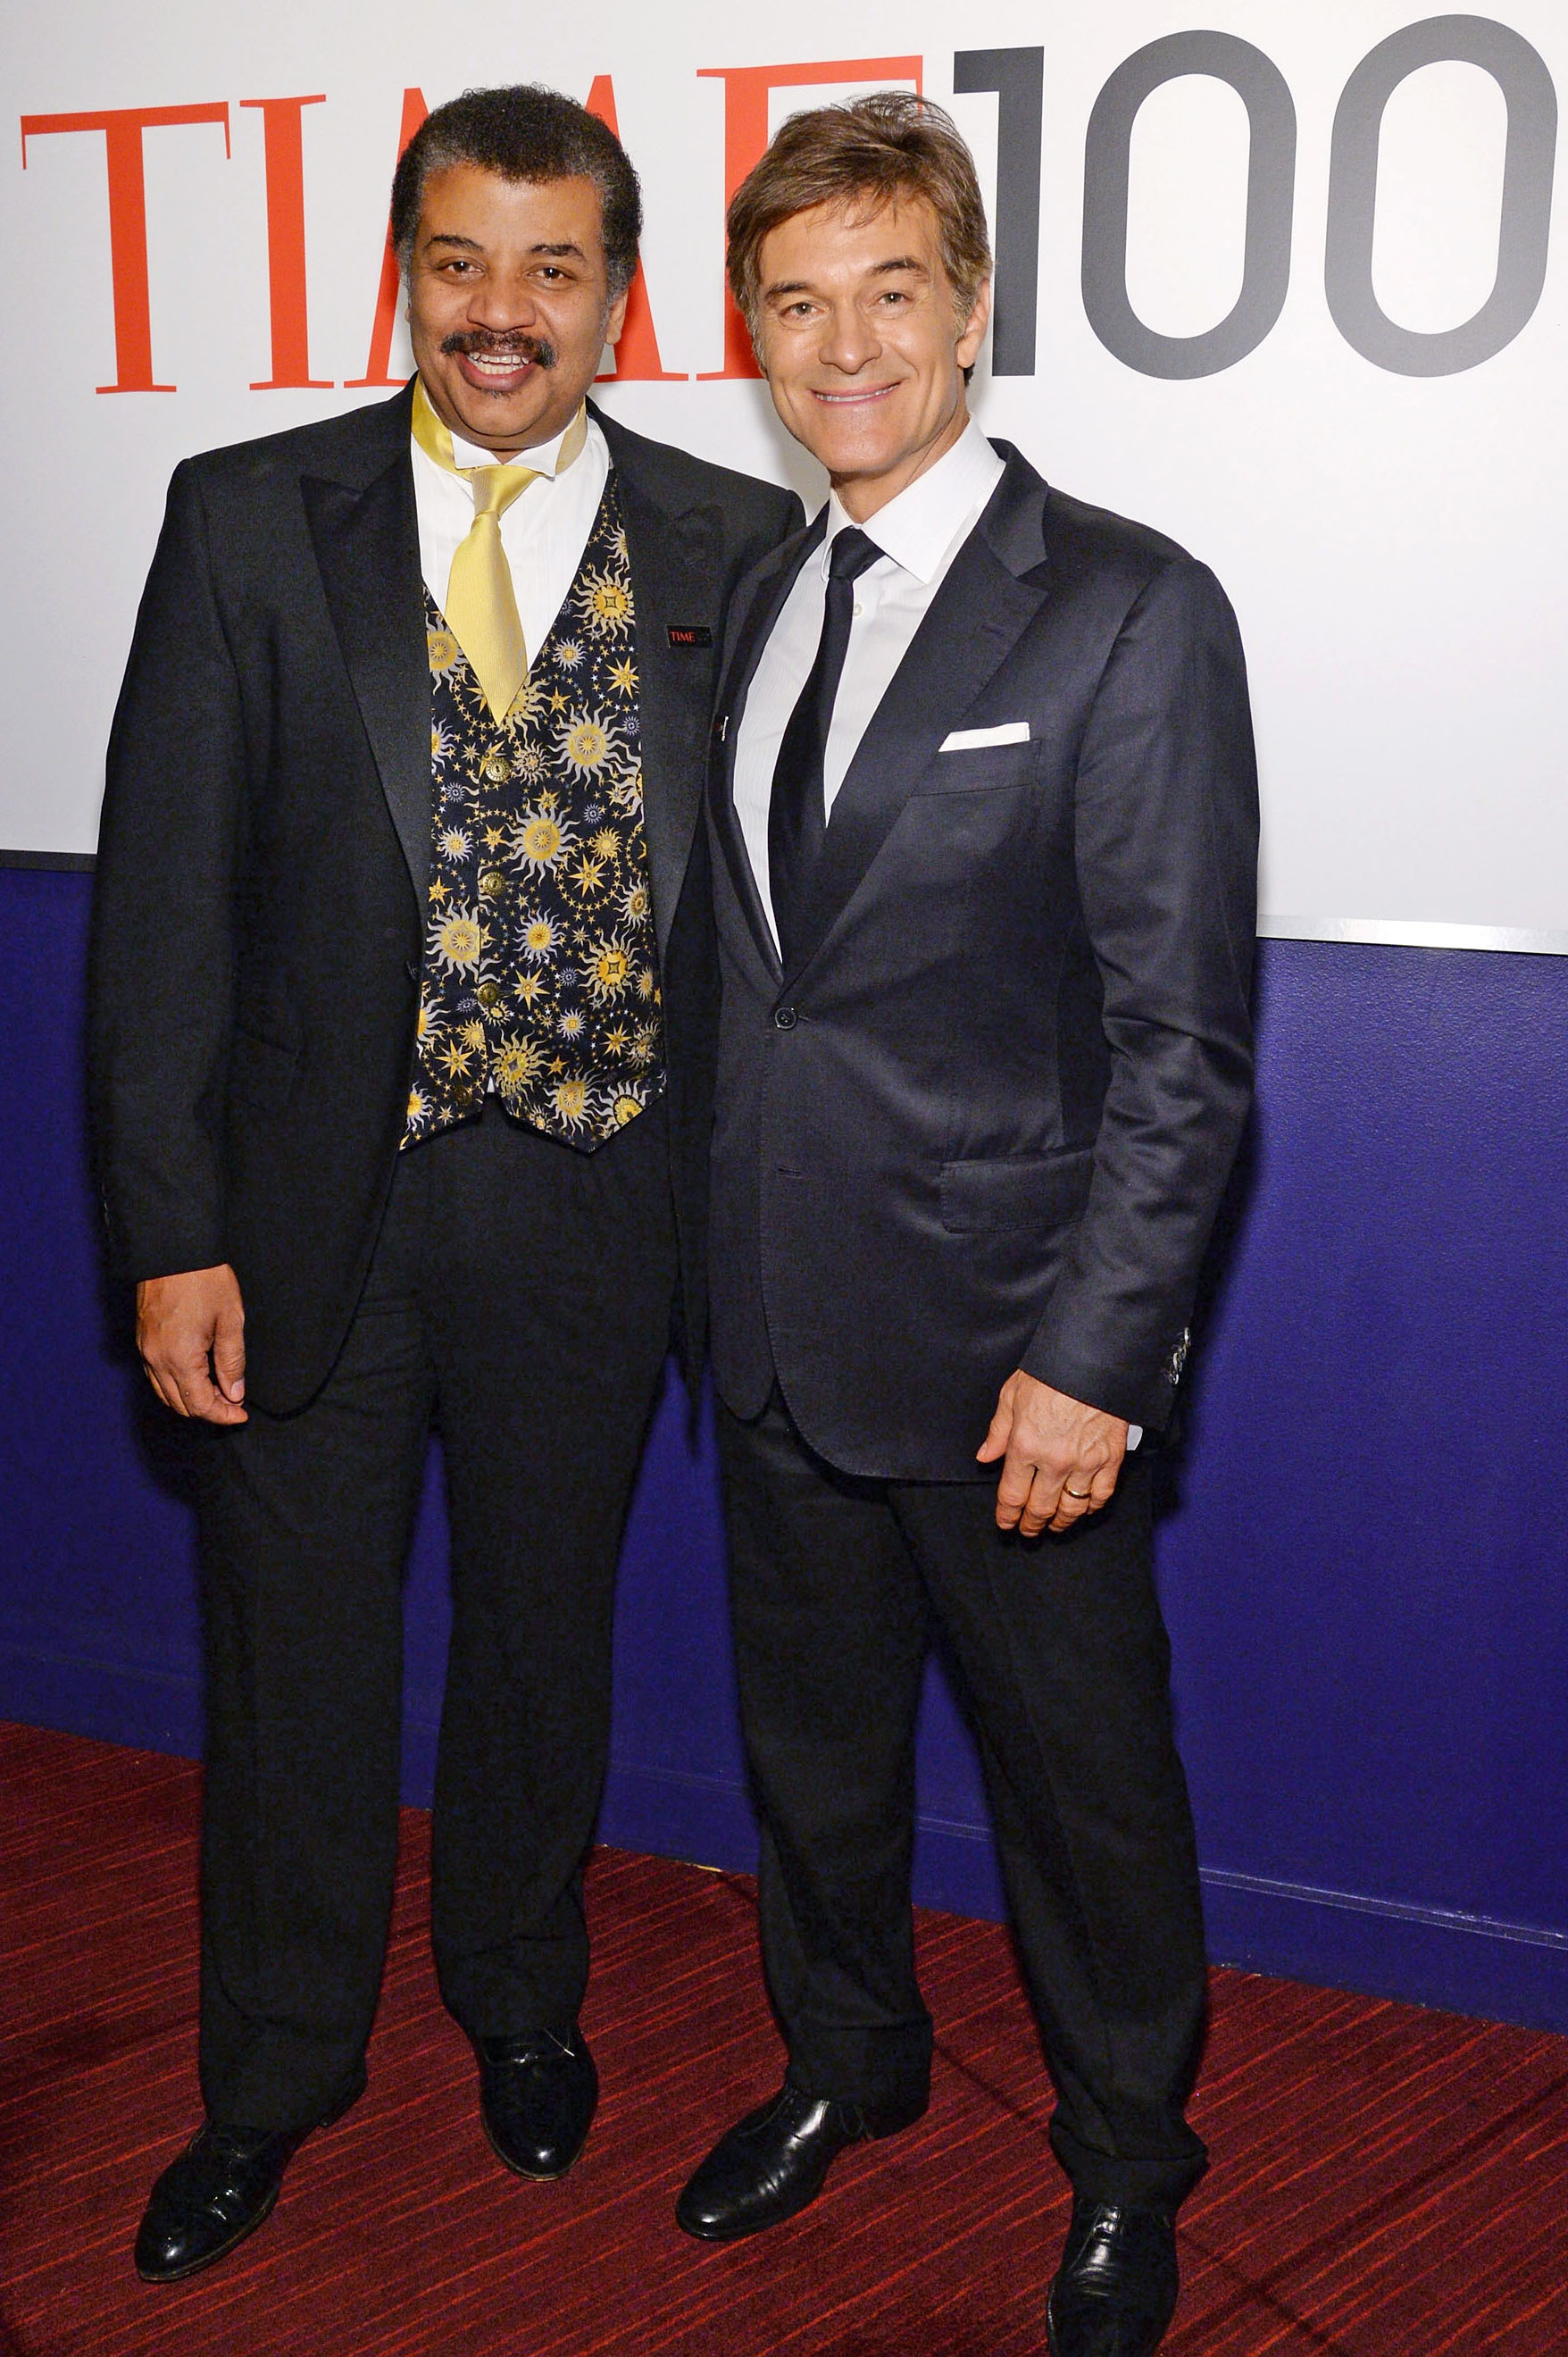 From left: Neil deGrasse Tyson and Dr. Mehmet Oz attend the TIME 100 Gala, TIME's 100 most influential people in the world, at Jazz at Lincoln Center on April 29, 2014 in New York City.